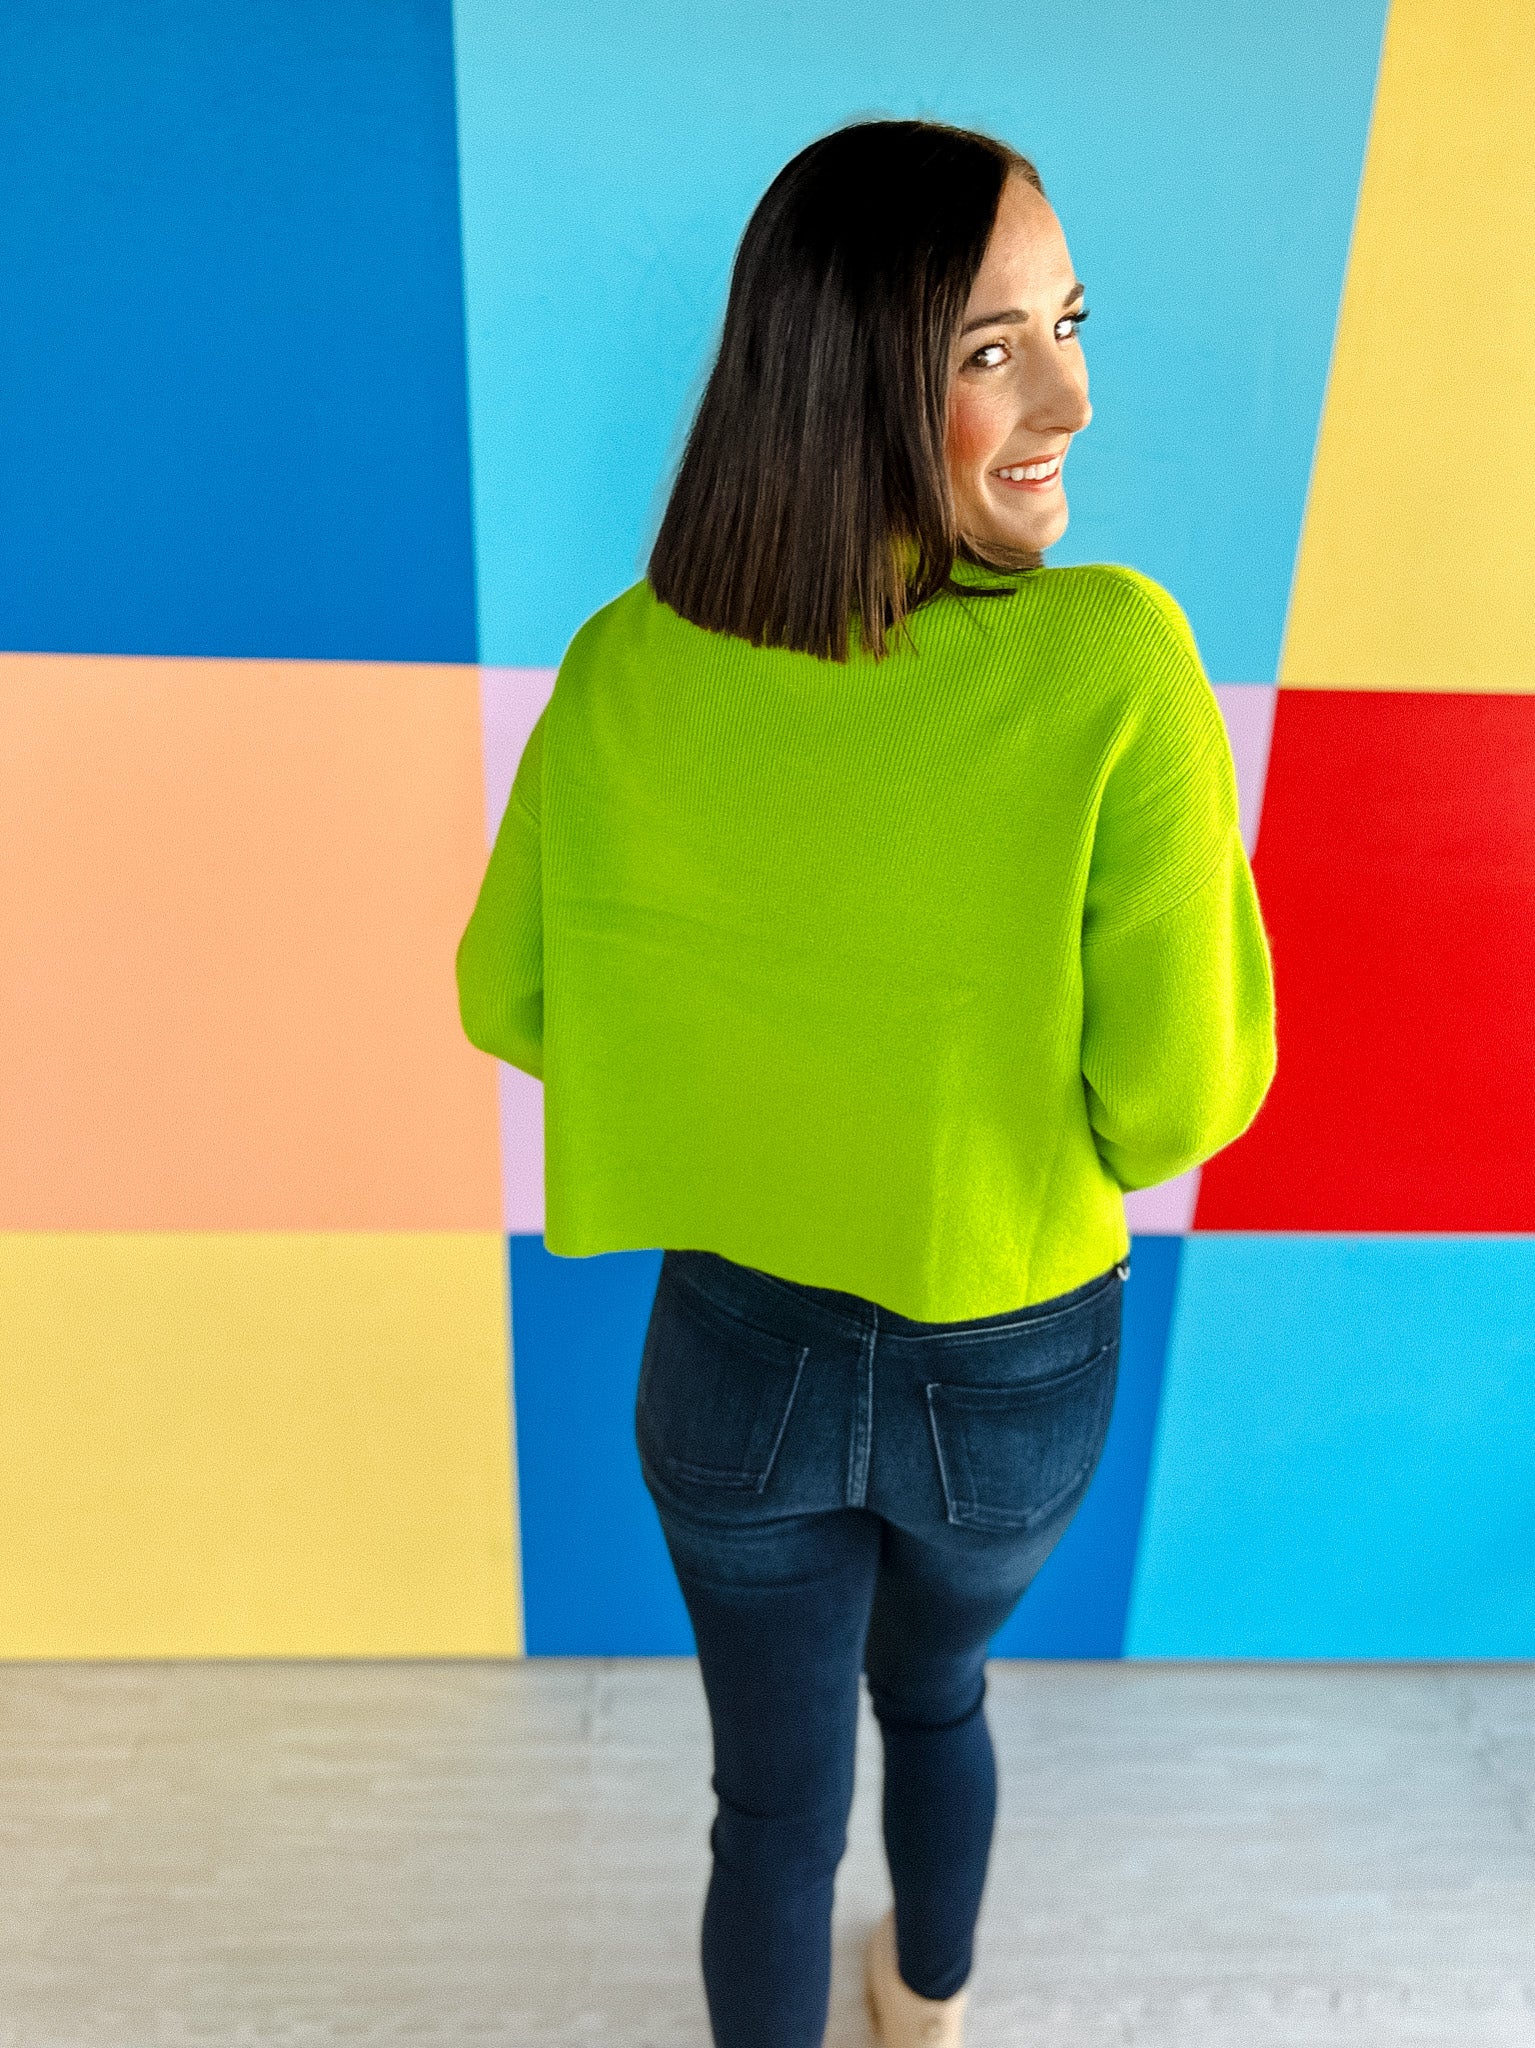 Latte Lover Turtleneck Knit Sweater - Bright Lime Green